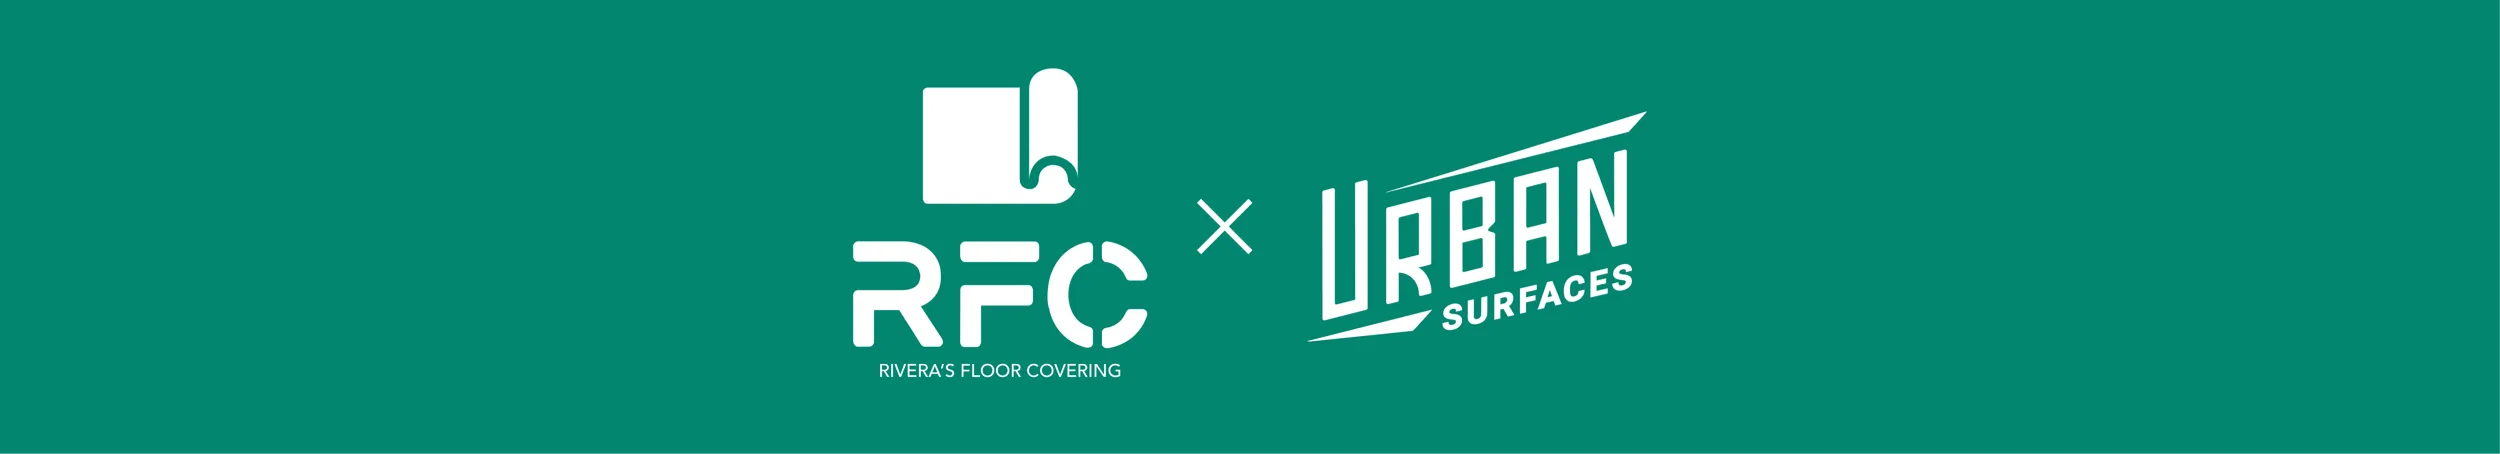 Collaboration logos for Rivera's Floor Covering and Urban Surfaces on a teal background.